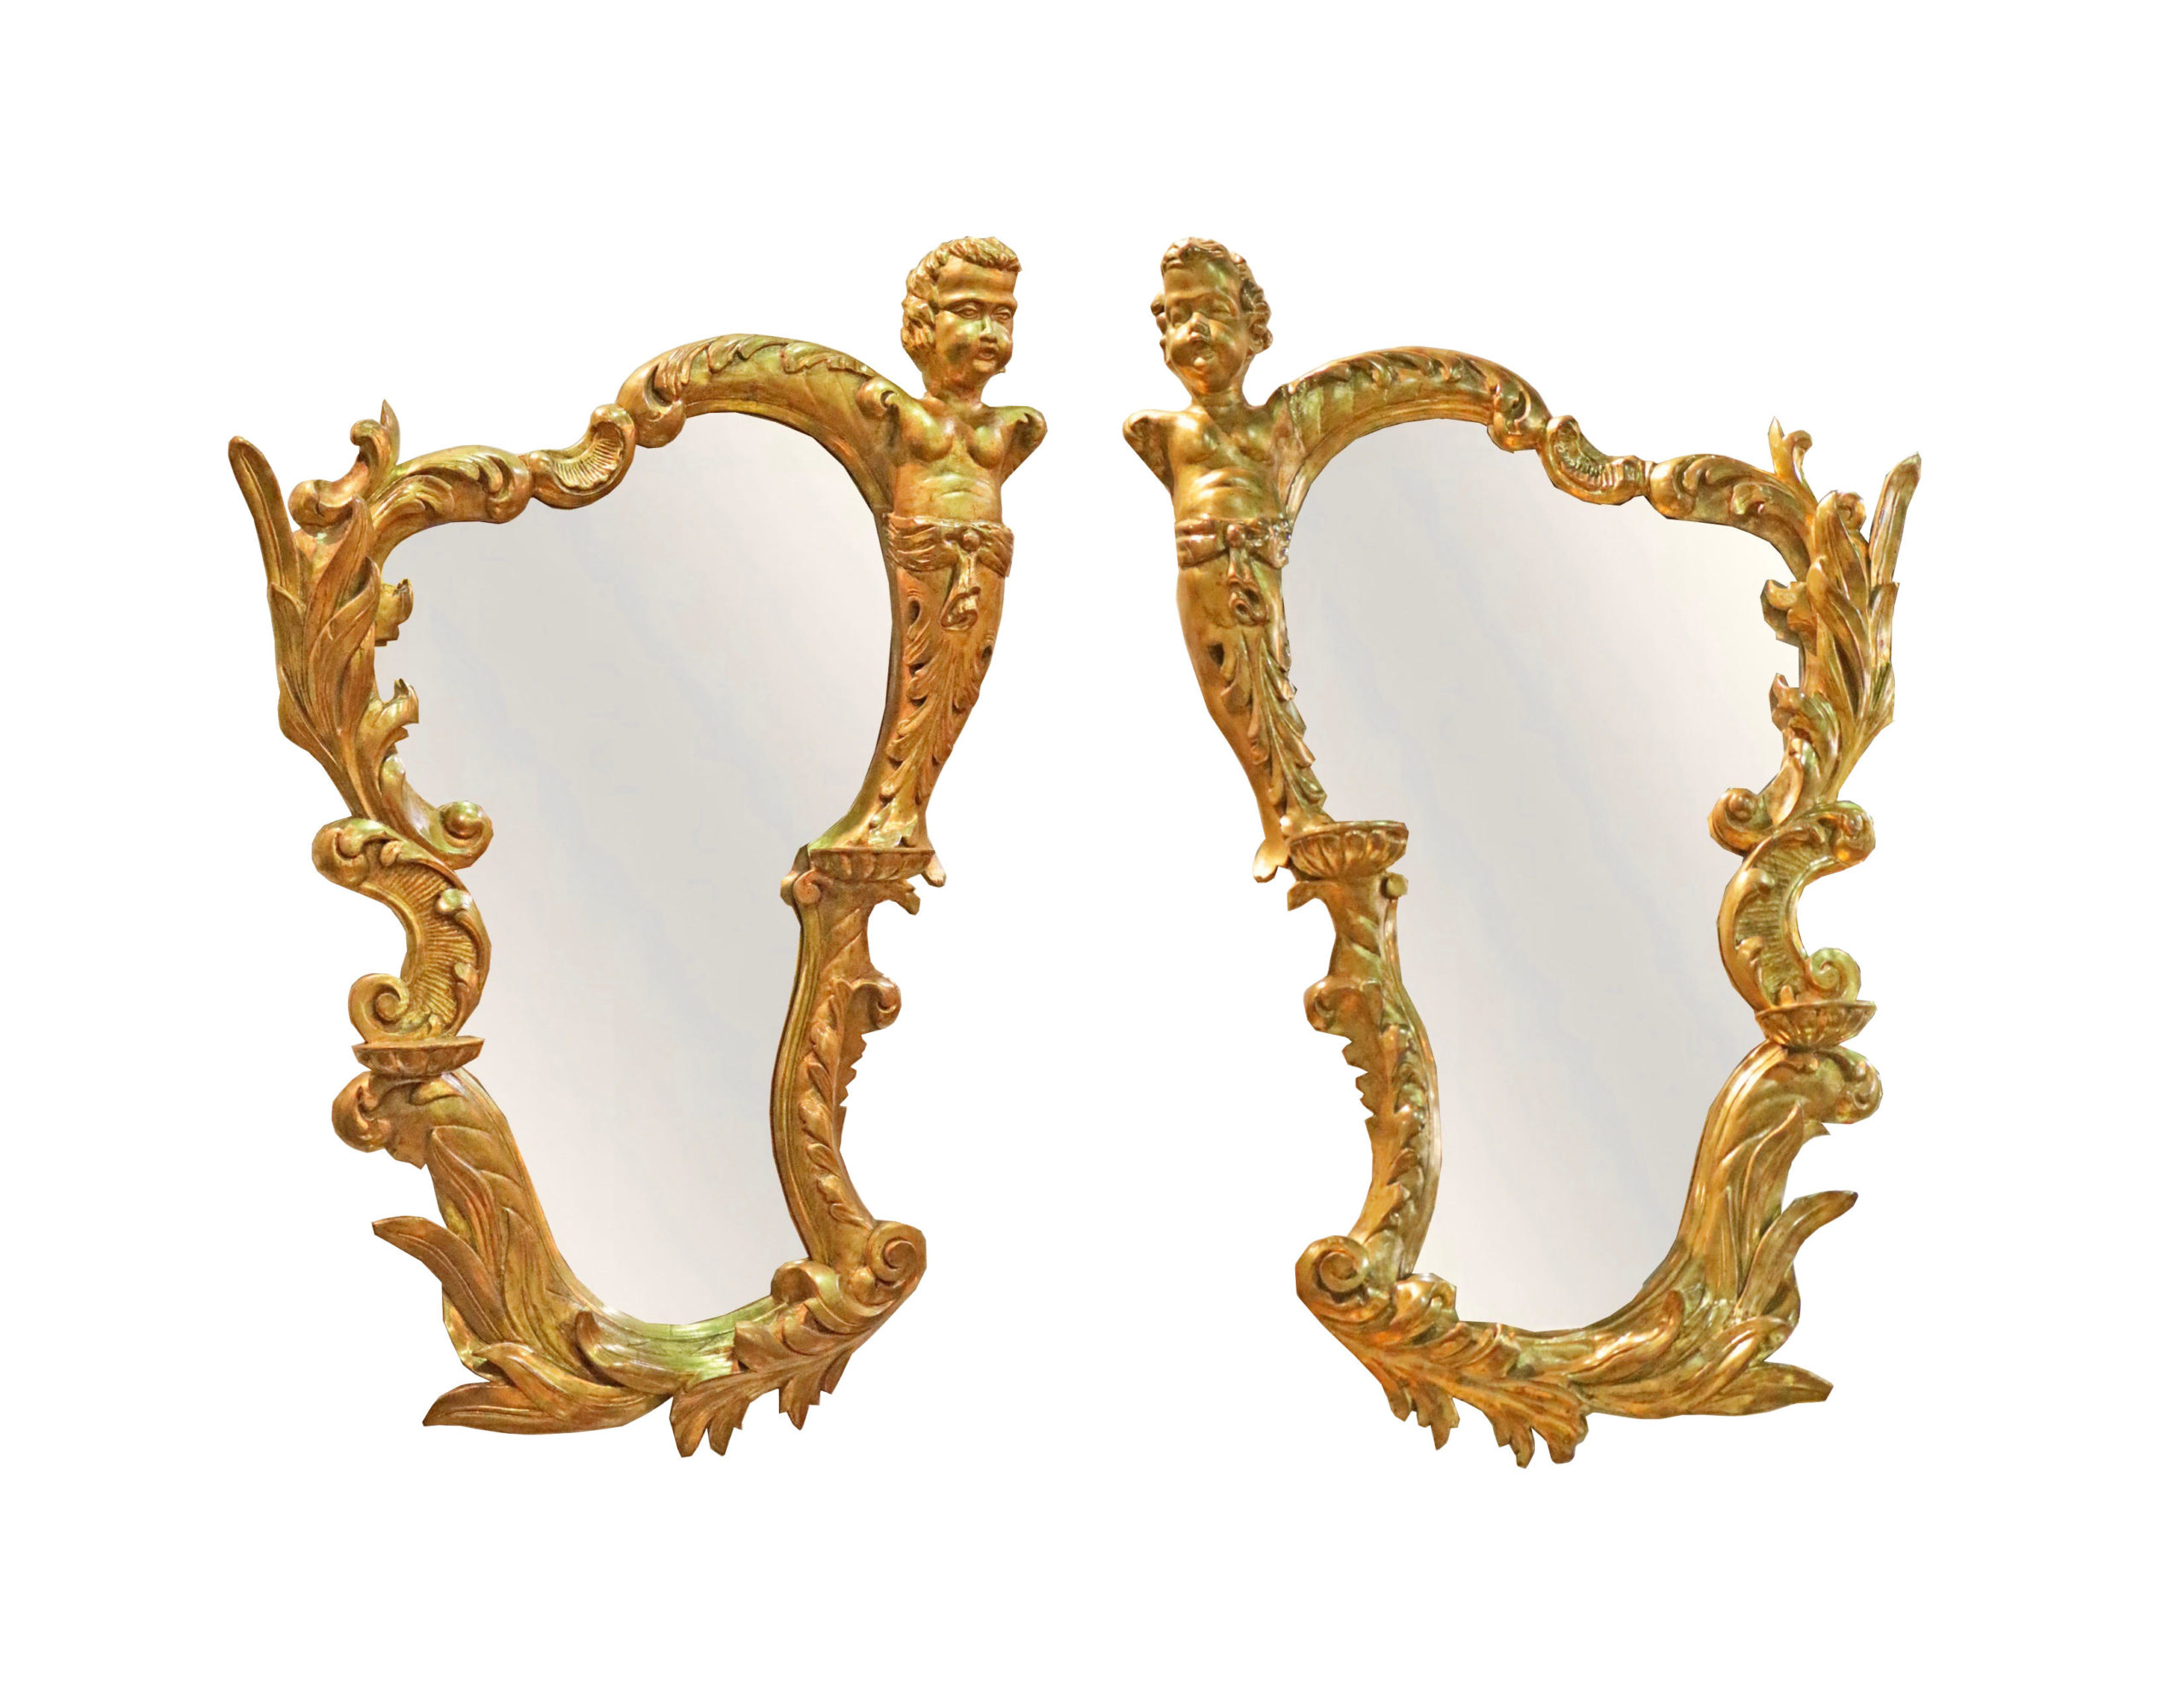 A Pair of 19th Century Italian Gilded Putti Mirrors No. 4842